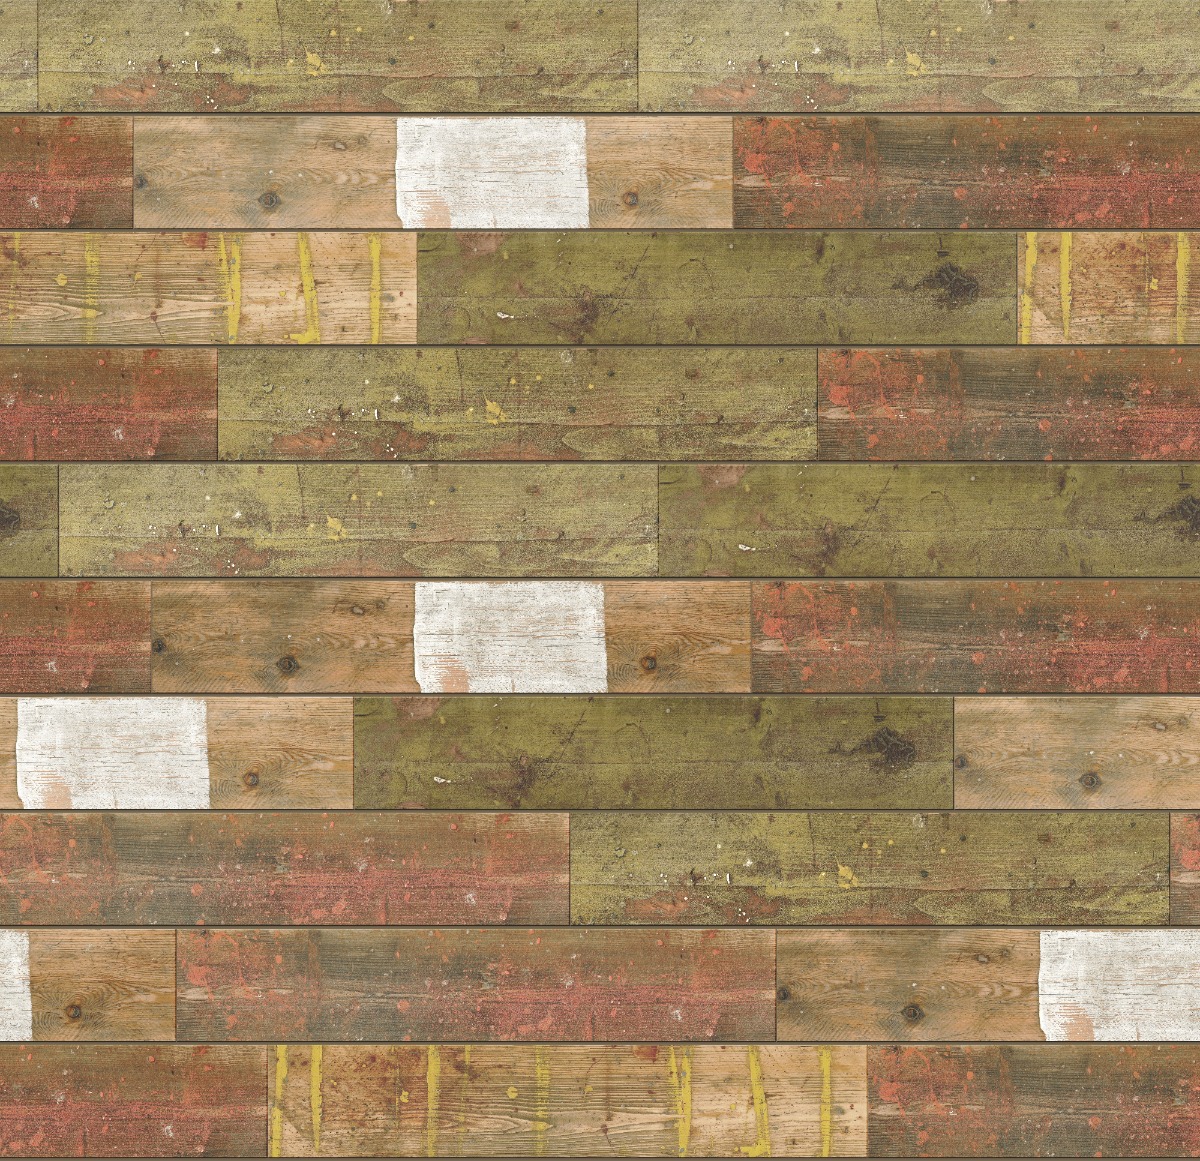 A seamless wood texture with recycled scaffold boards boards arranged in a Staggered pattern